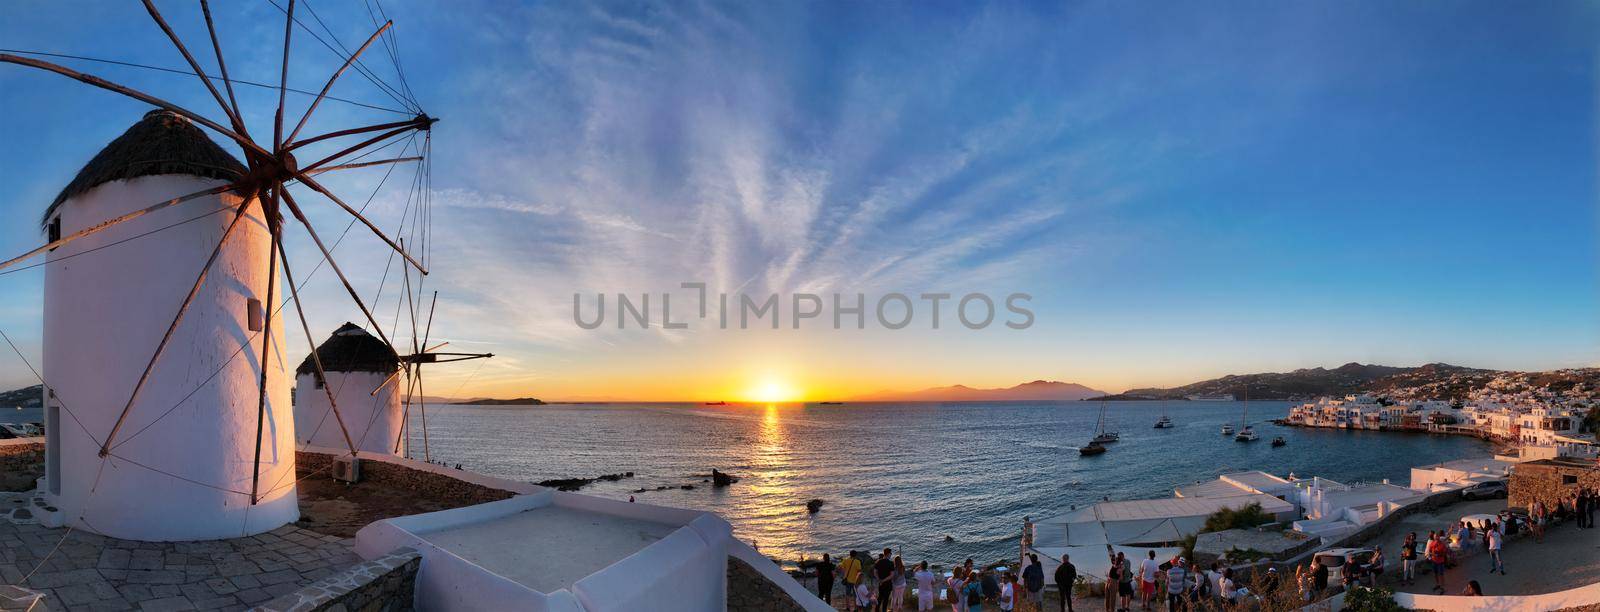 Traditional greek windmills on Mykonos island on sunset with dramatic sky and Little Venice quarter with tourist crowd by dimol